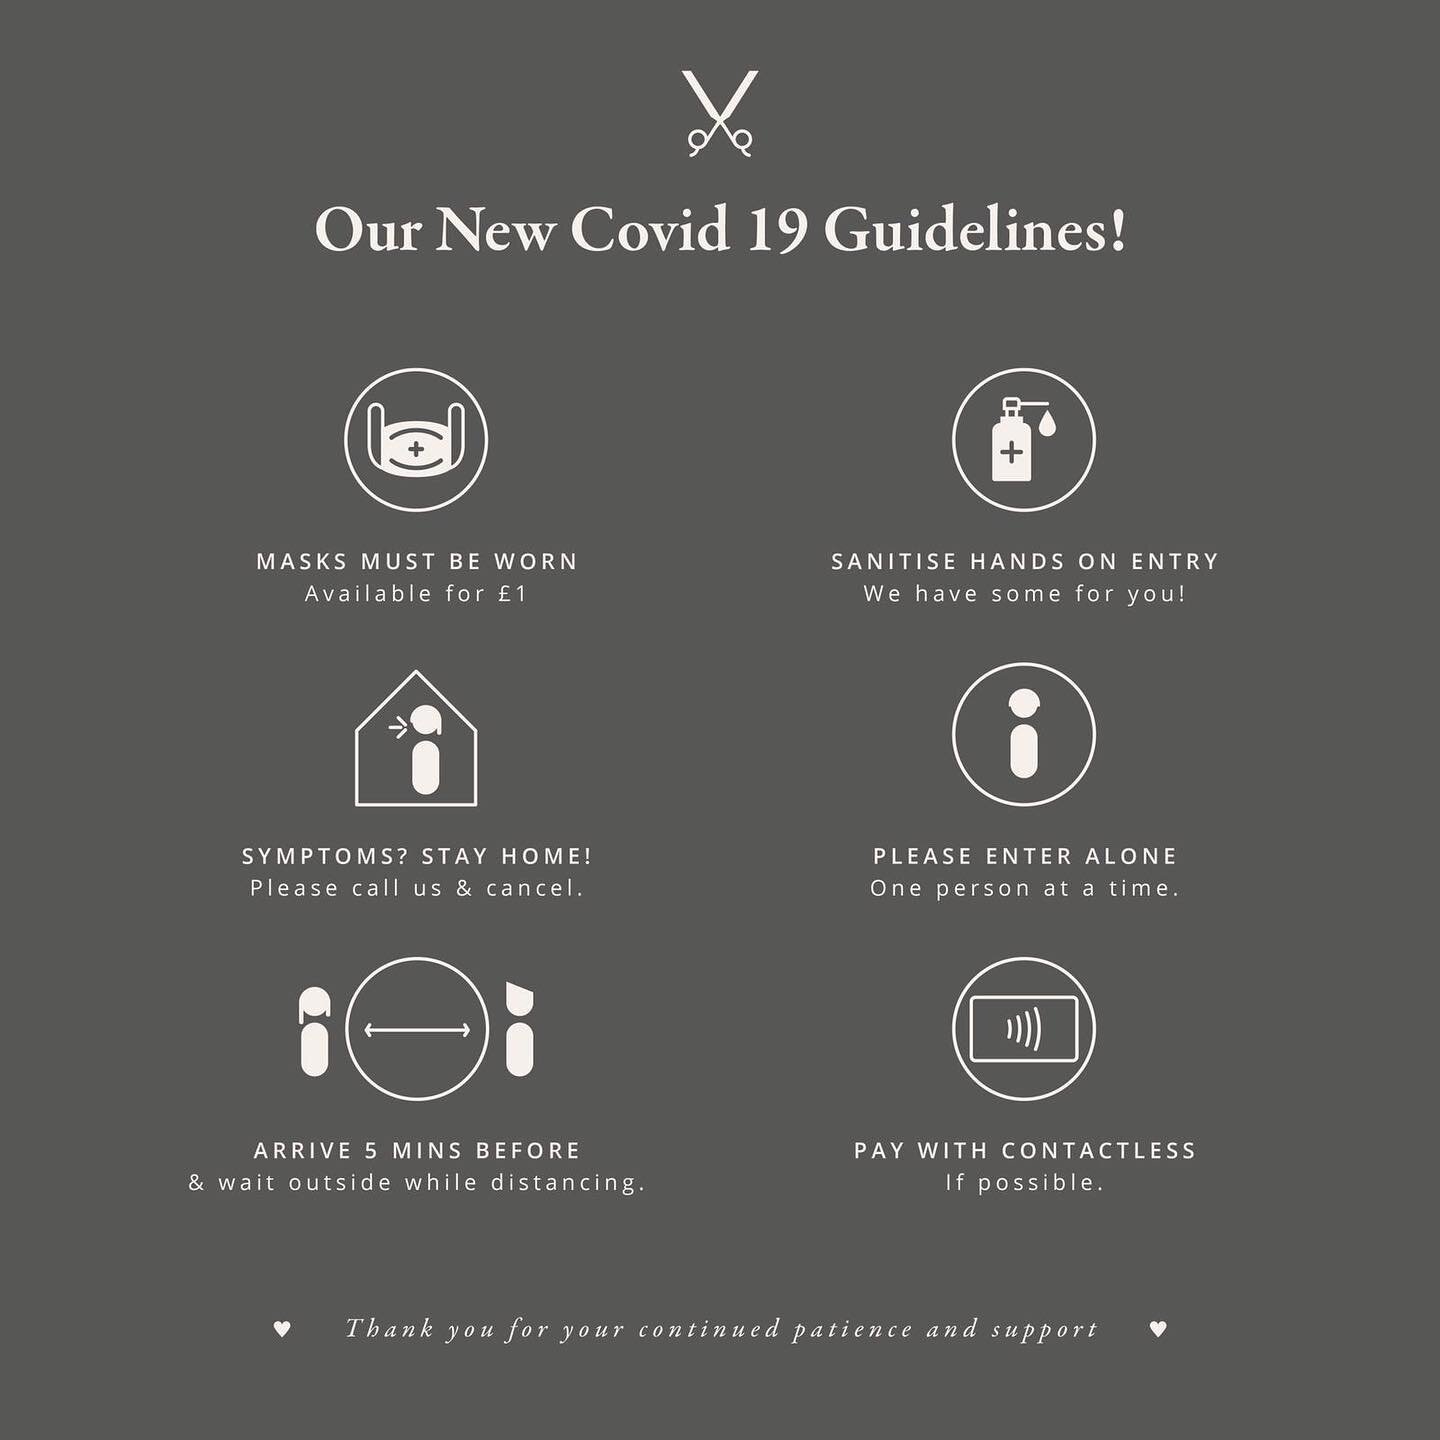 Not long until we get to open our doors again! Here are our new Covid 19 guidelines. Thank you again for your understanding and continued support! #canterburyhairdressers #hairsaloncanterbury #ecohairdressers #hairdressersinkent #hairsalon